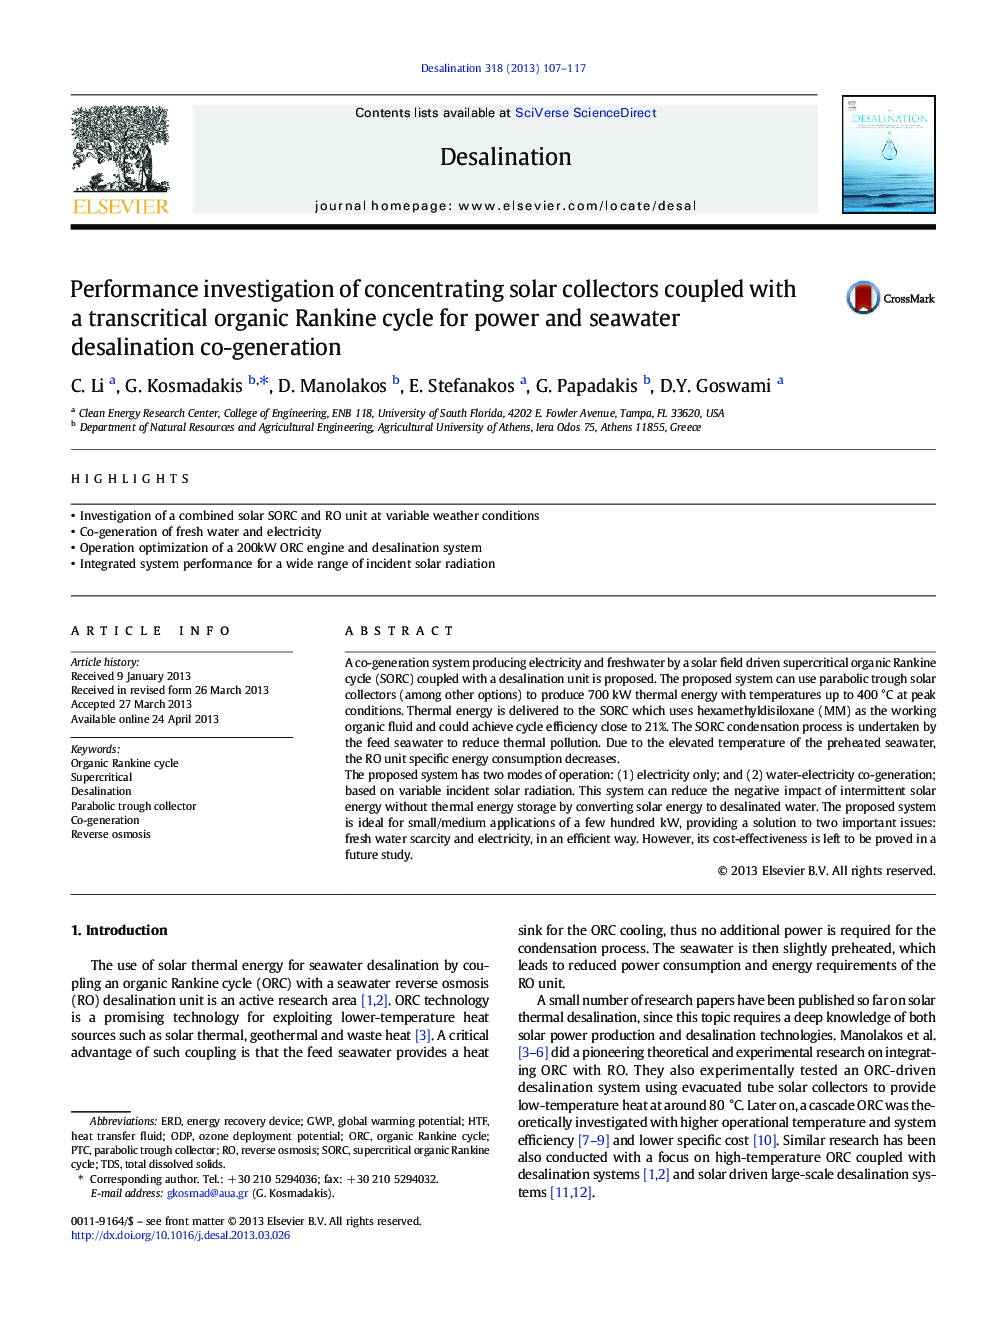 Performance investigation of concentrating solar collectors coupled with a transcritical organic Rankine cycle for power and seawater desalination co-generation